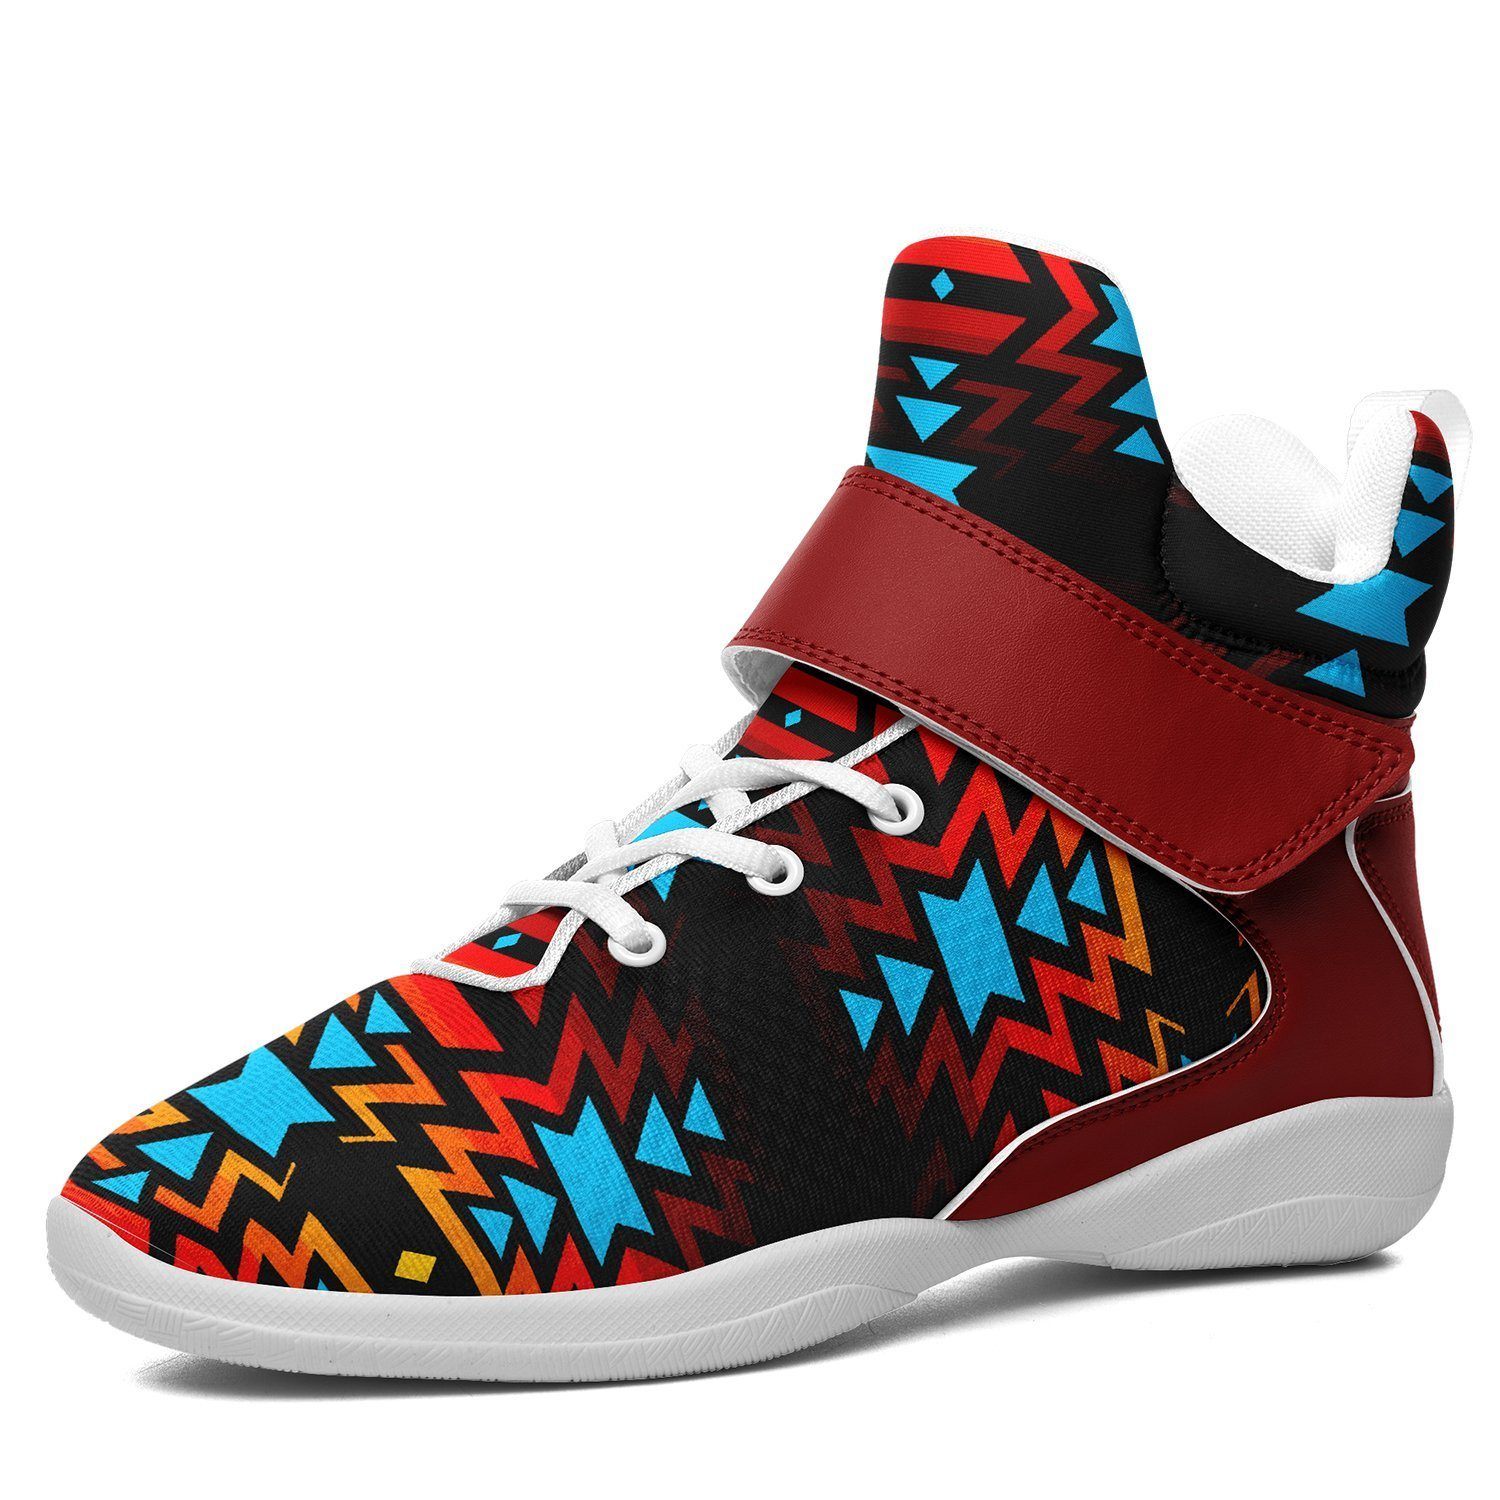 Black Fire and Turquoise Kid's Ipottaa Basketball / Sport High Top Shoes 49 Dzine US Child 12.5 / EUR 30 White Sole with Dark Red Strap 